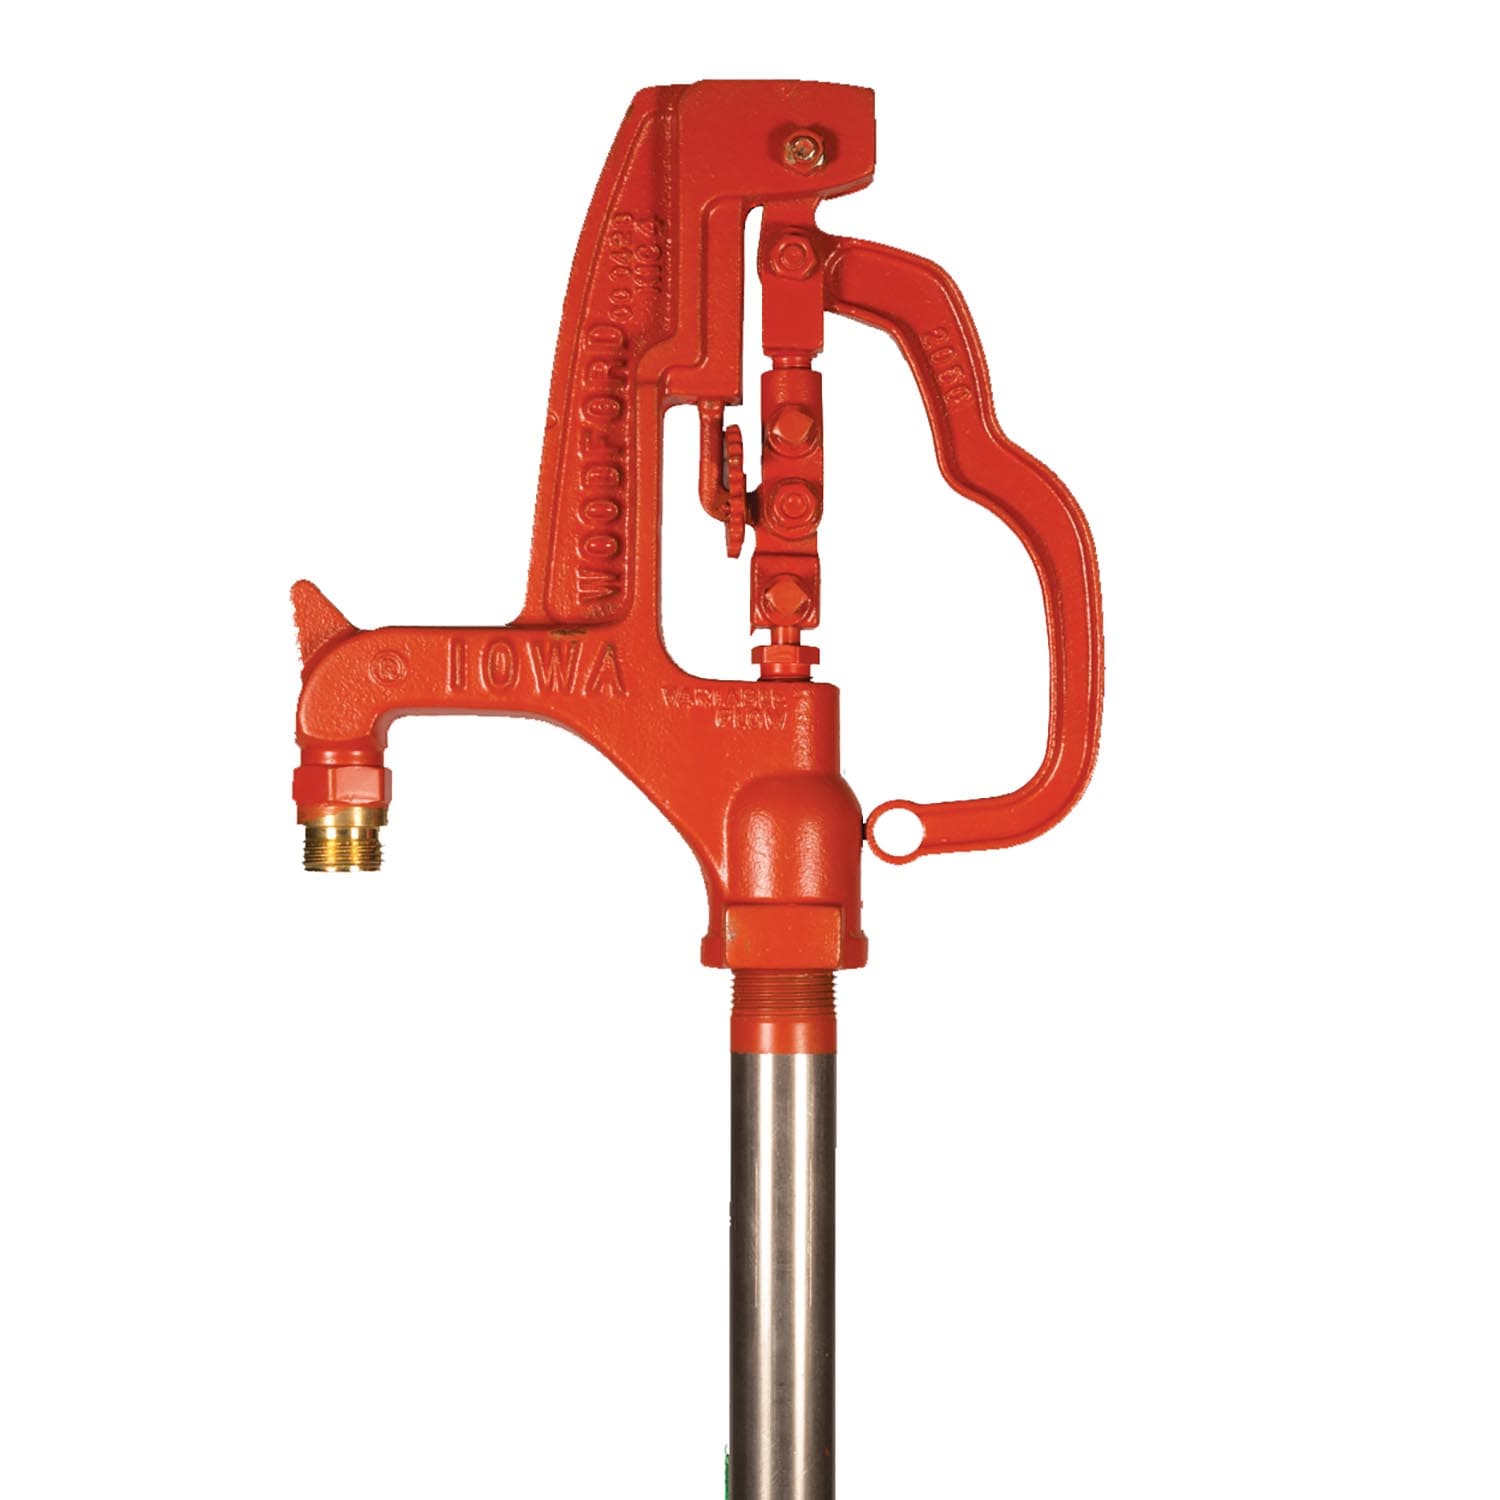 Woodford Y34-4 Y34-4 Yard Hydrant Freezeless,4 ft bury Depth 84.5 inch Overall Length